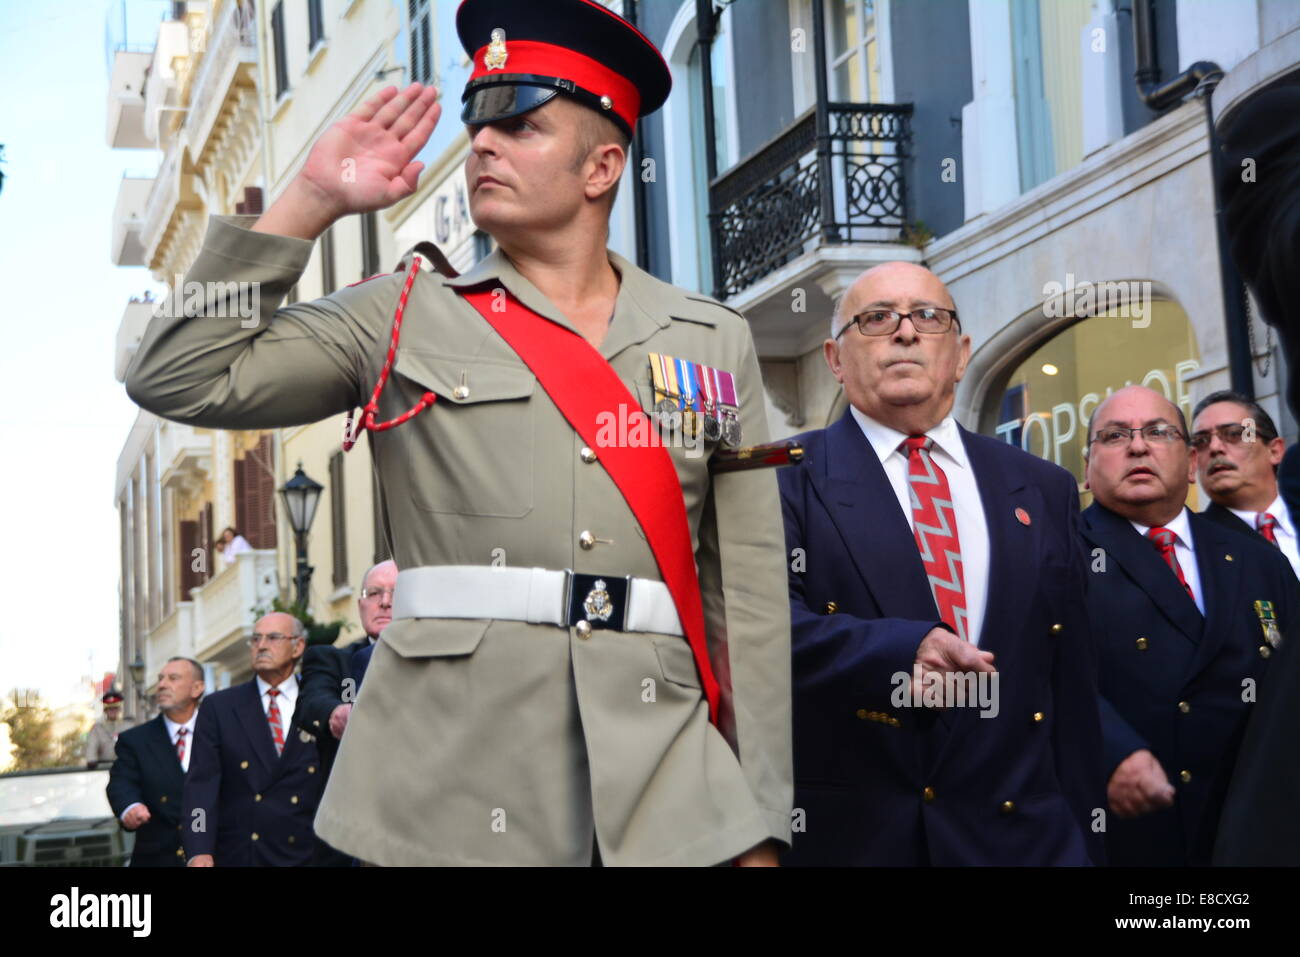 GIbraltar 5th October 2014 - The Royal Gibraltar Regiment marched through Main Street in Gibraltar, flying its full colours on Saturday 4th October. The Regiment is celebrating its 75th Anniversary. As holders of the Freedom of the City award the Regiment took the opportunity to march through Gibraltar's City Centre, saluting the Mayor and Governor. Credit:  Stephen Ignacio/Alamy Live News Stock Photo